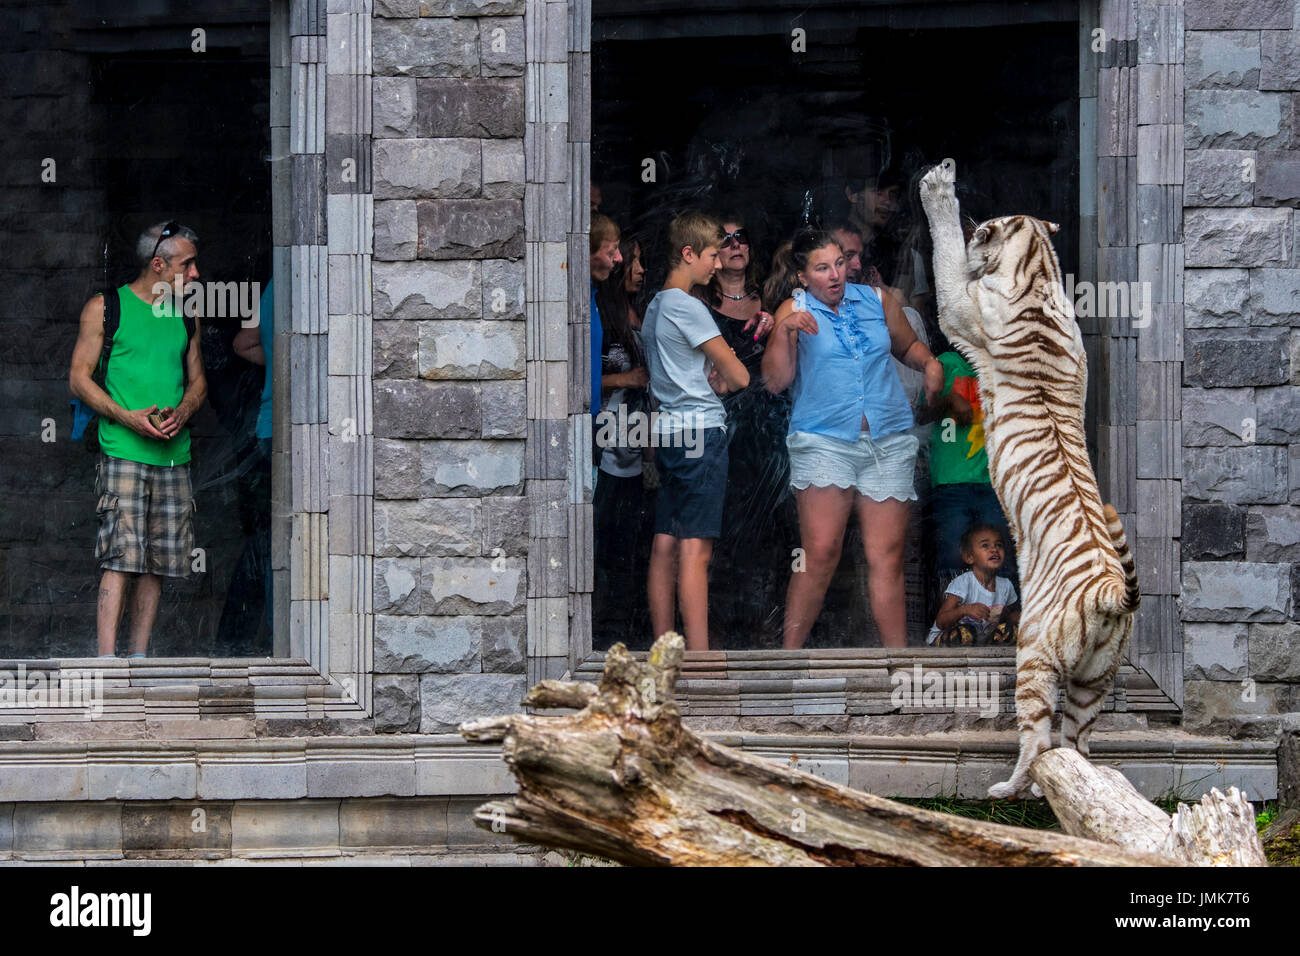 White tiger / bleached tiger (Panthera tigris) trying to attack frightened visitors behind glass pane in zoo Stock Photo